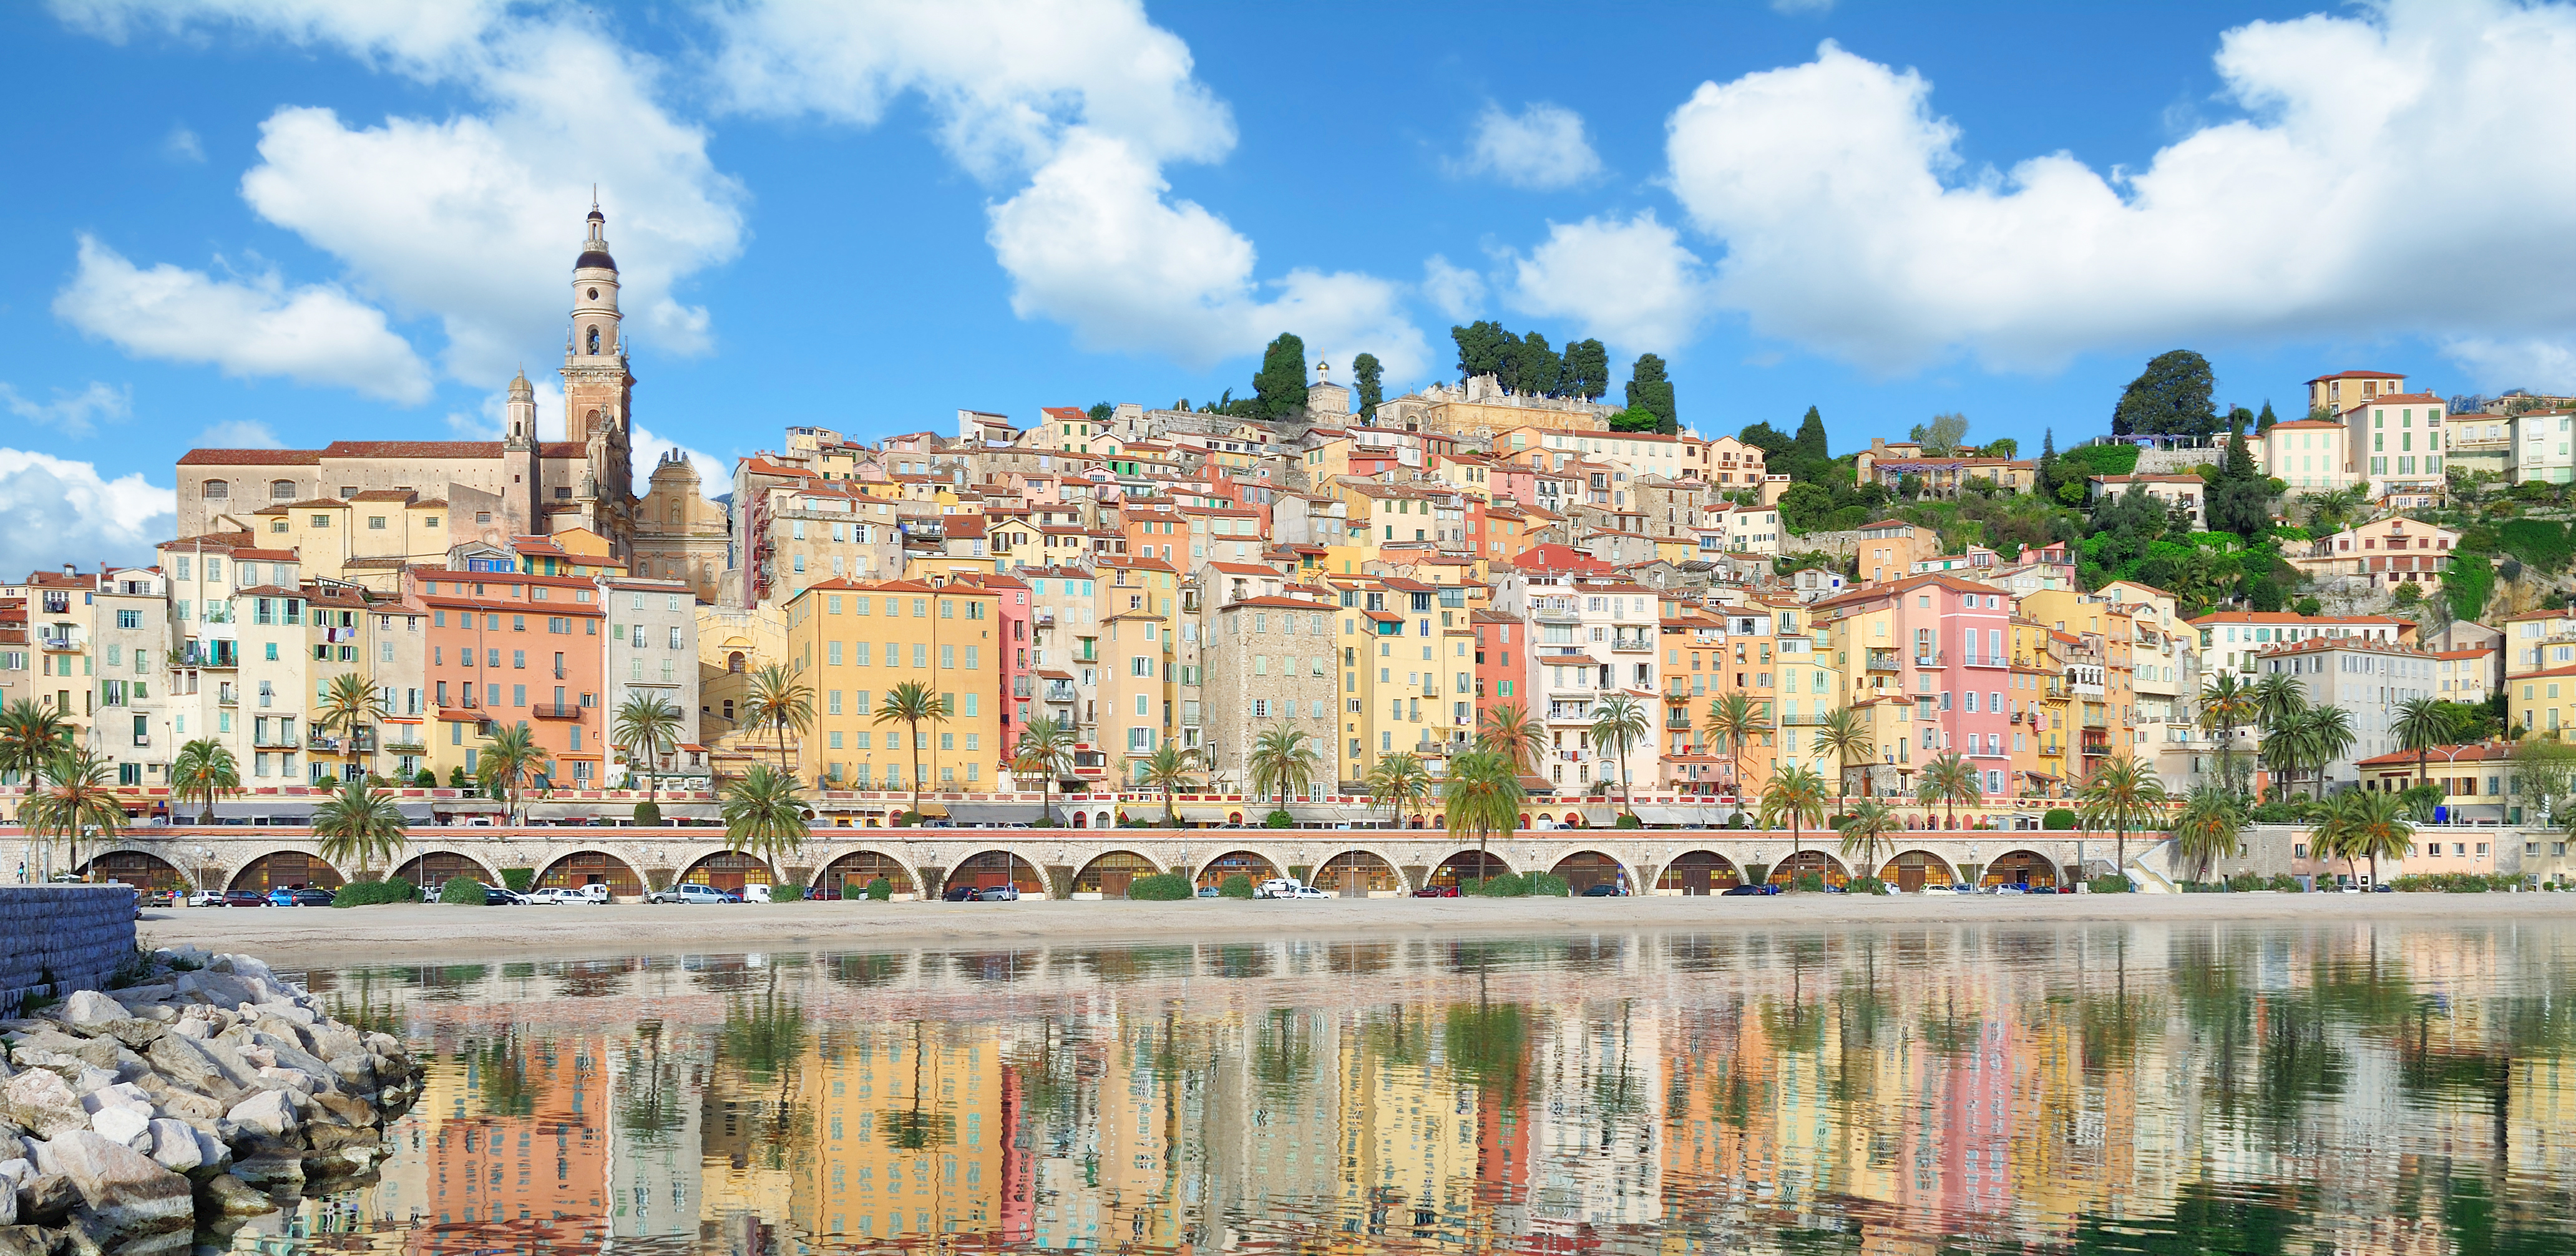 Car Hire France with Avis. There's no better way to see France than by car. This image depicts Menton, on the French Riviera.